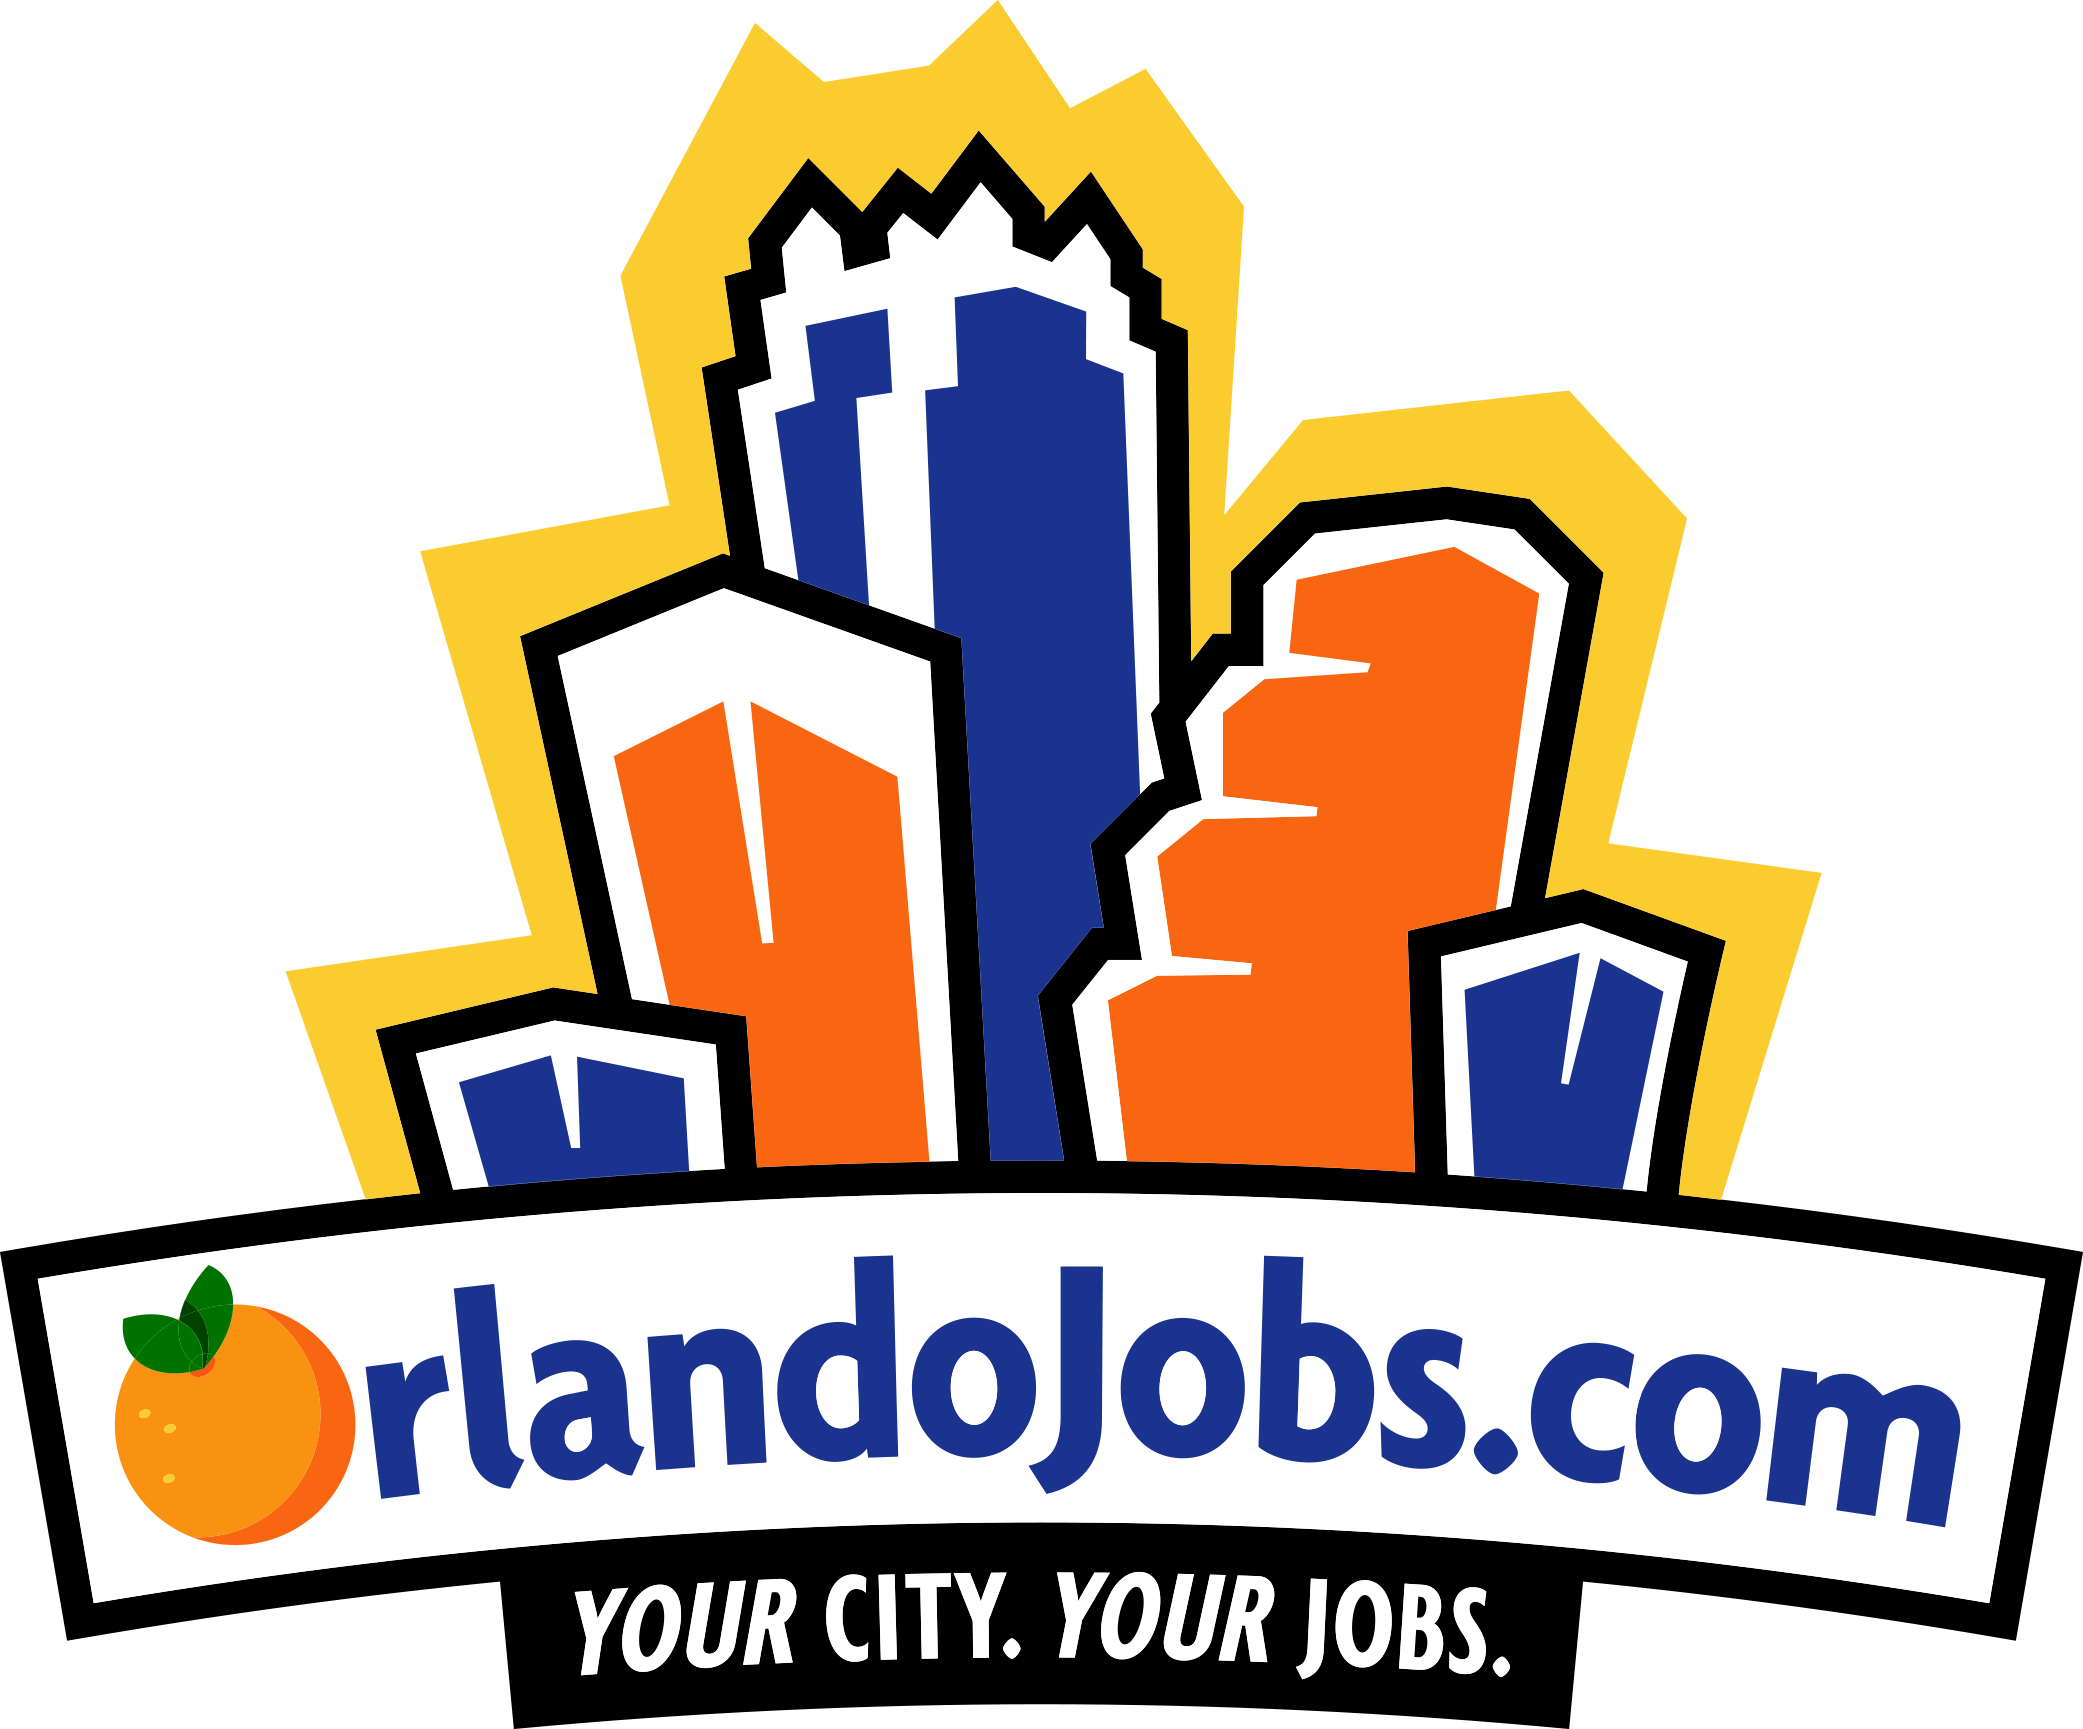 Employers At The - Orlando Jobs (2083x1729)